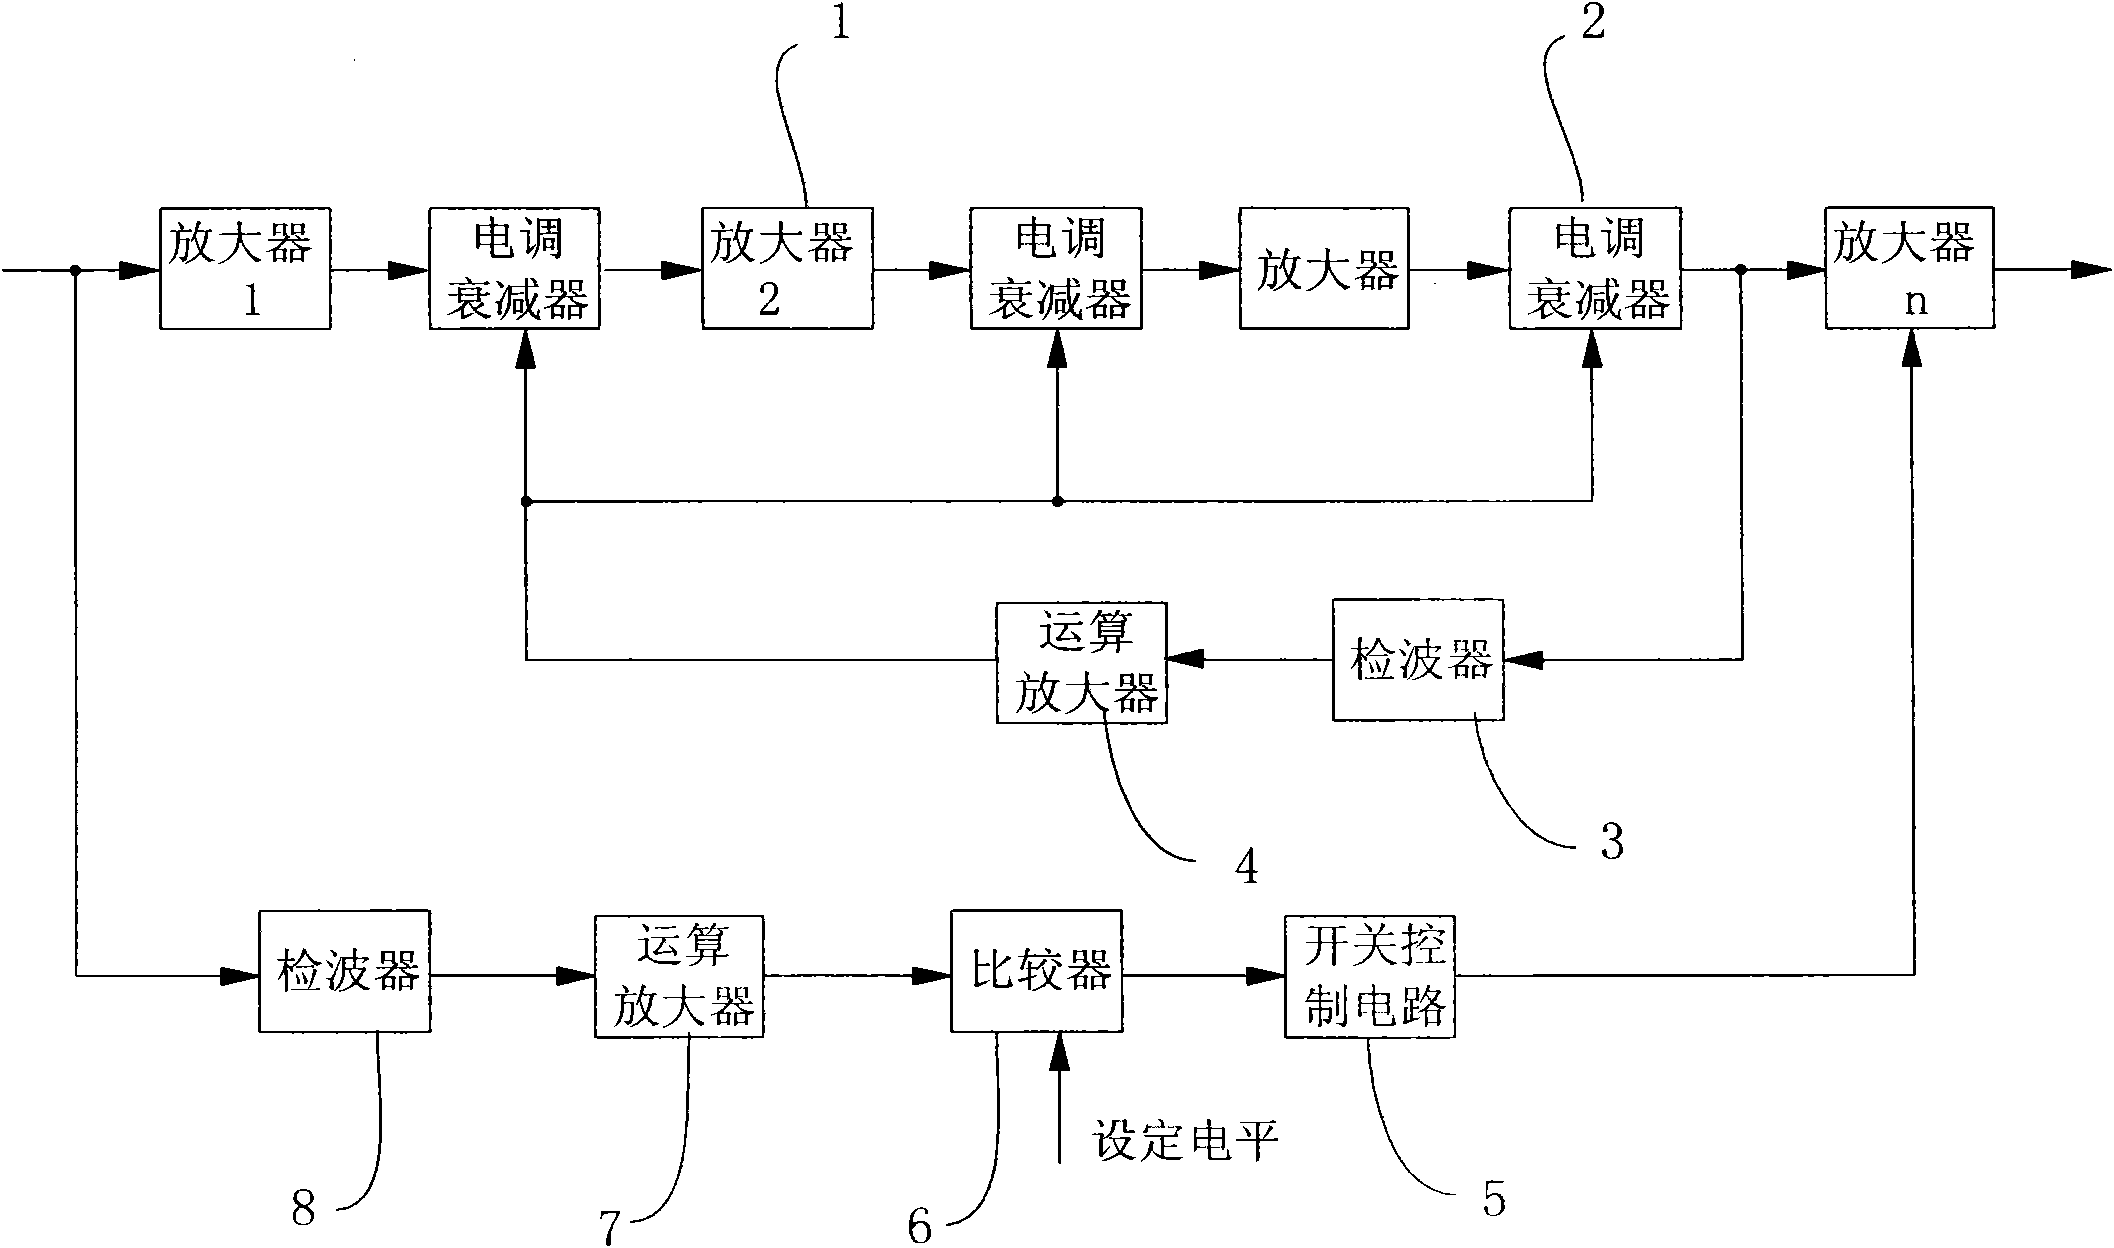 Squelch control method of automatic gain power amplifier chain and circuit